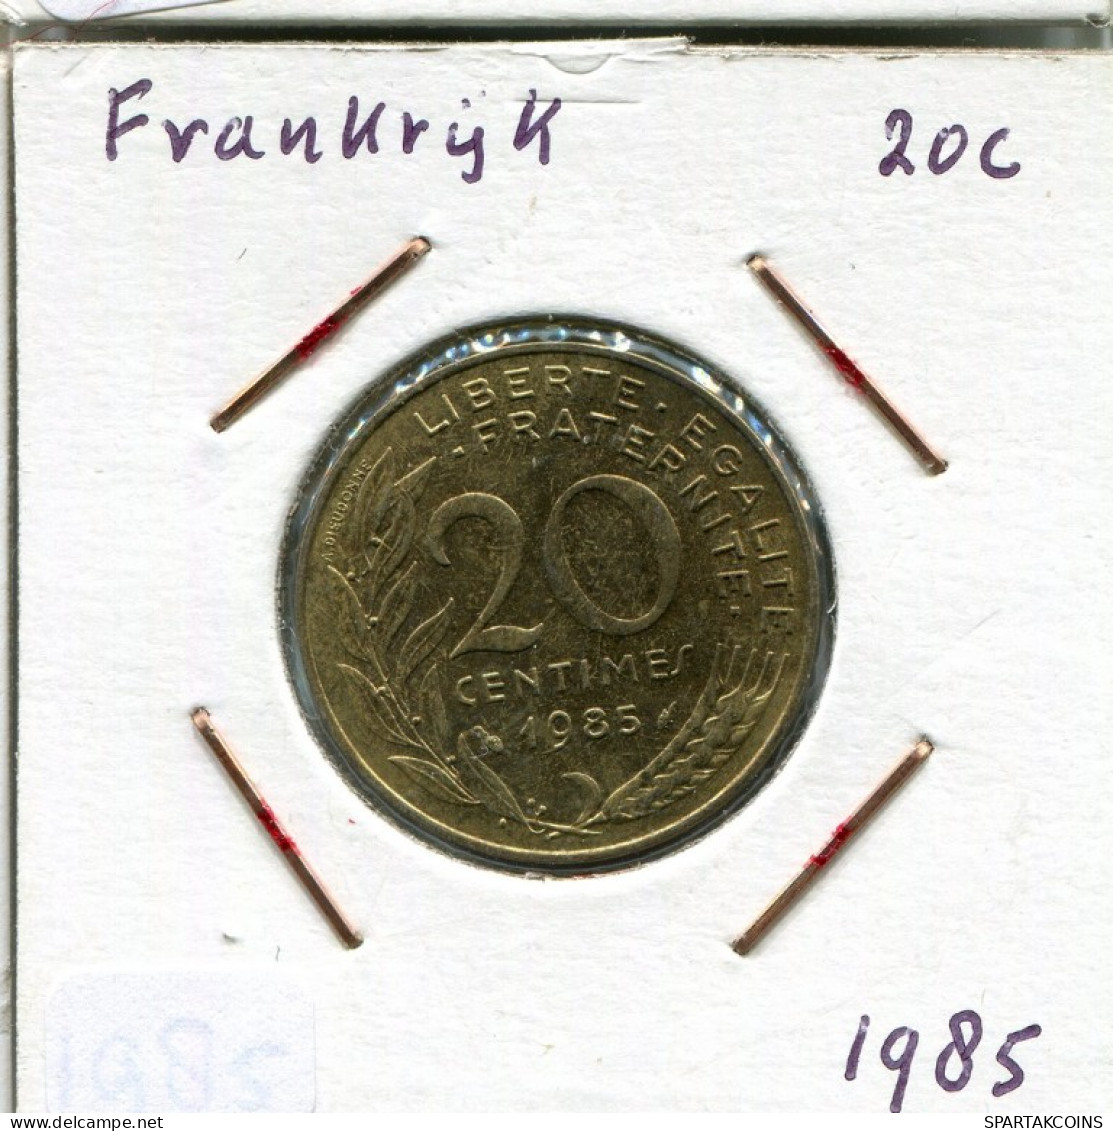 20 CENTIMES 1985 FRANCE Coin French Coin #AM866.U.A - 20 Centimes